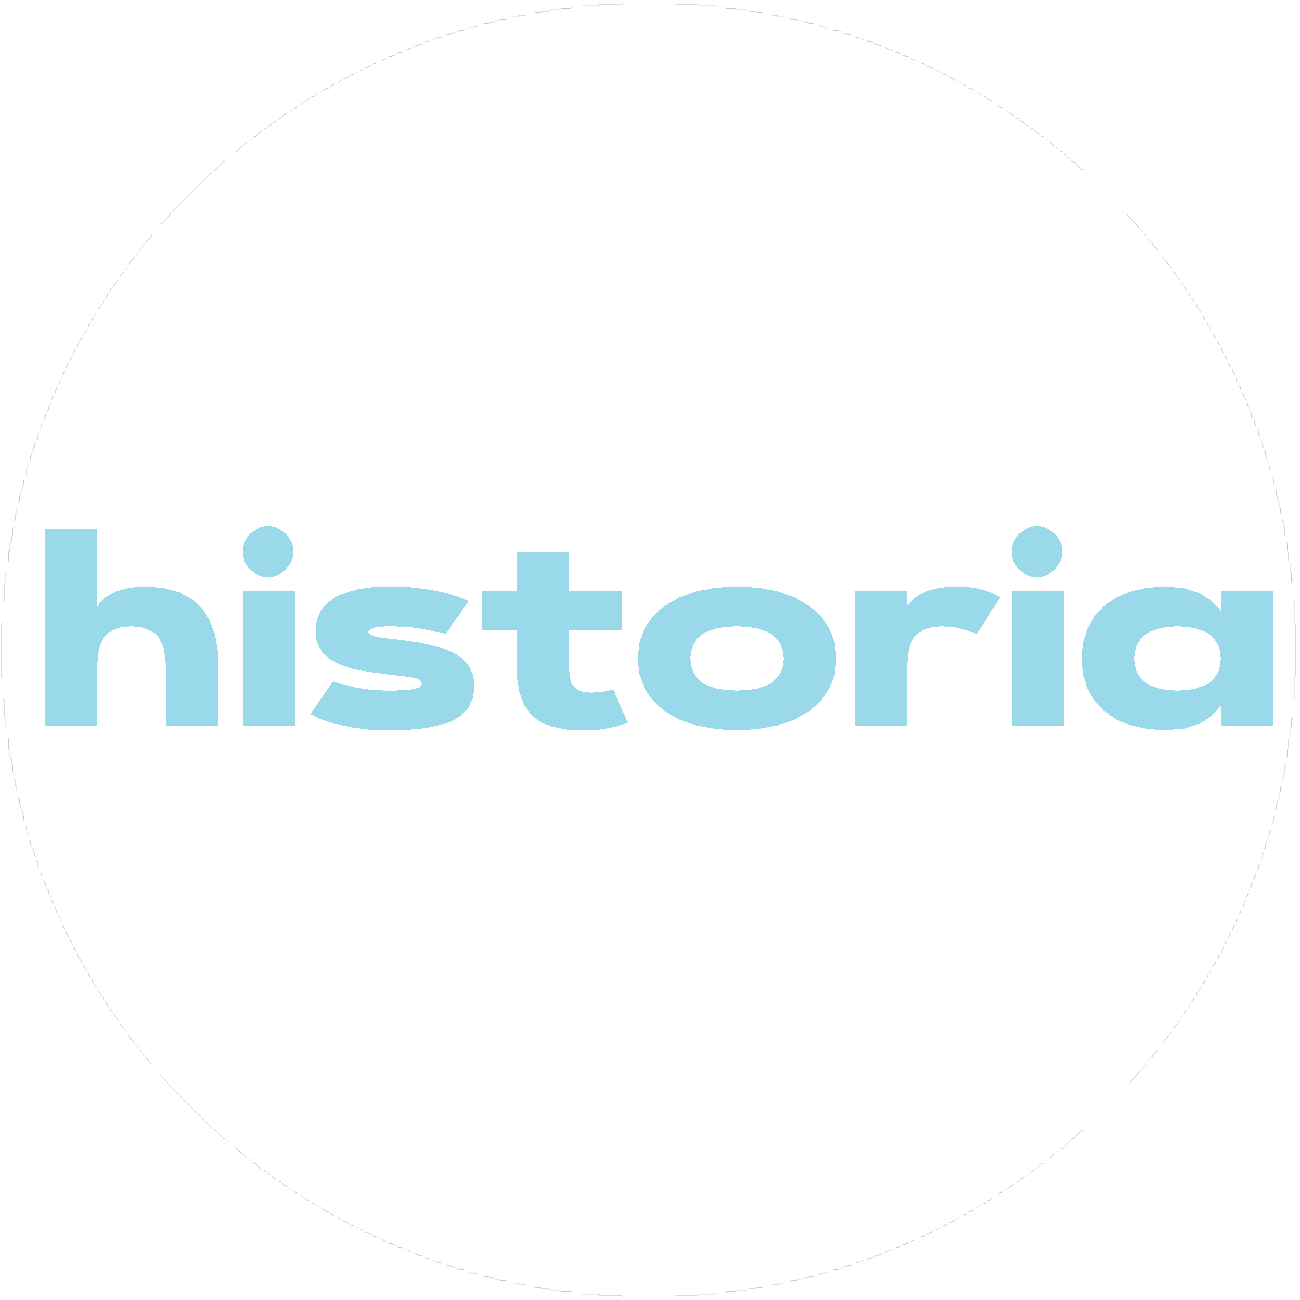 881-historia-image-button.png